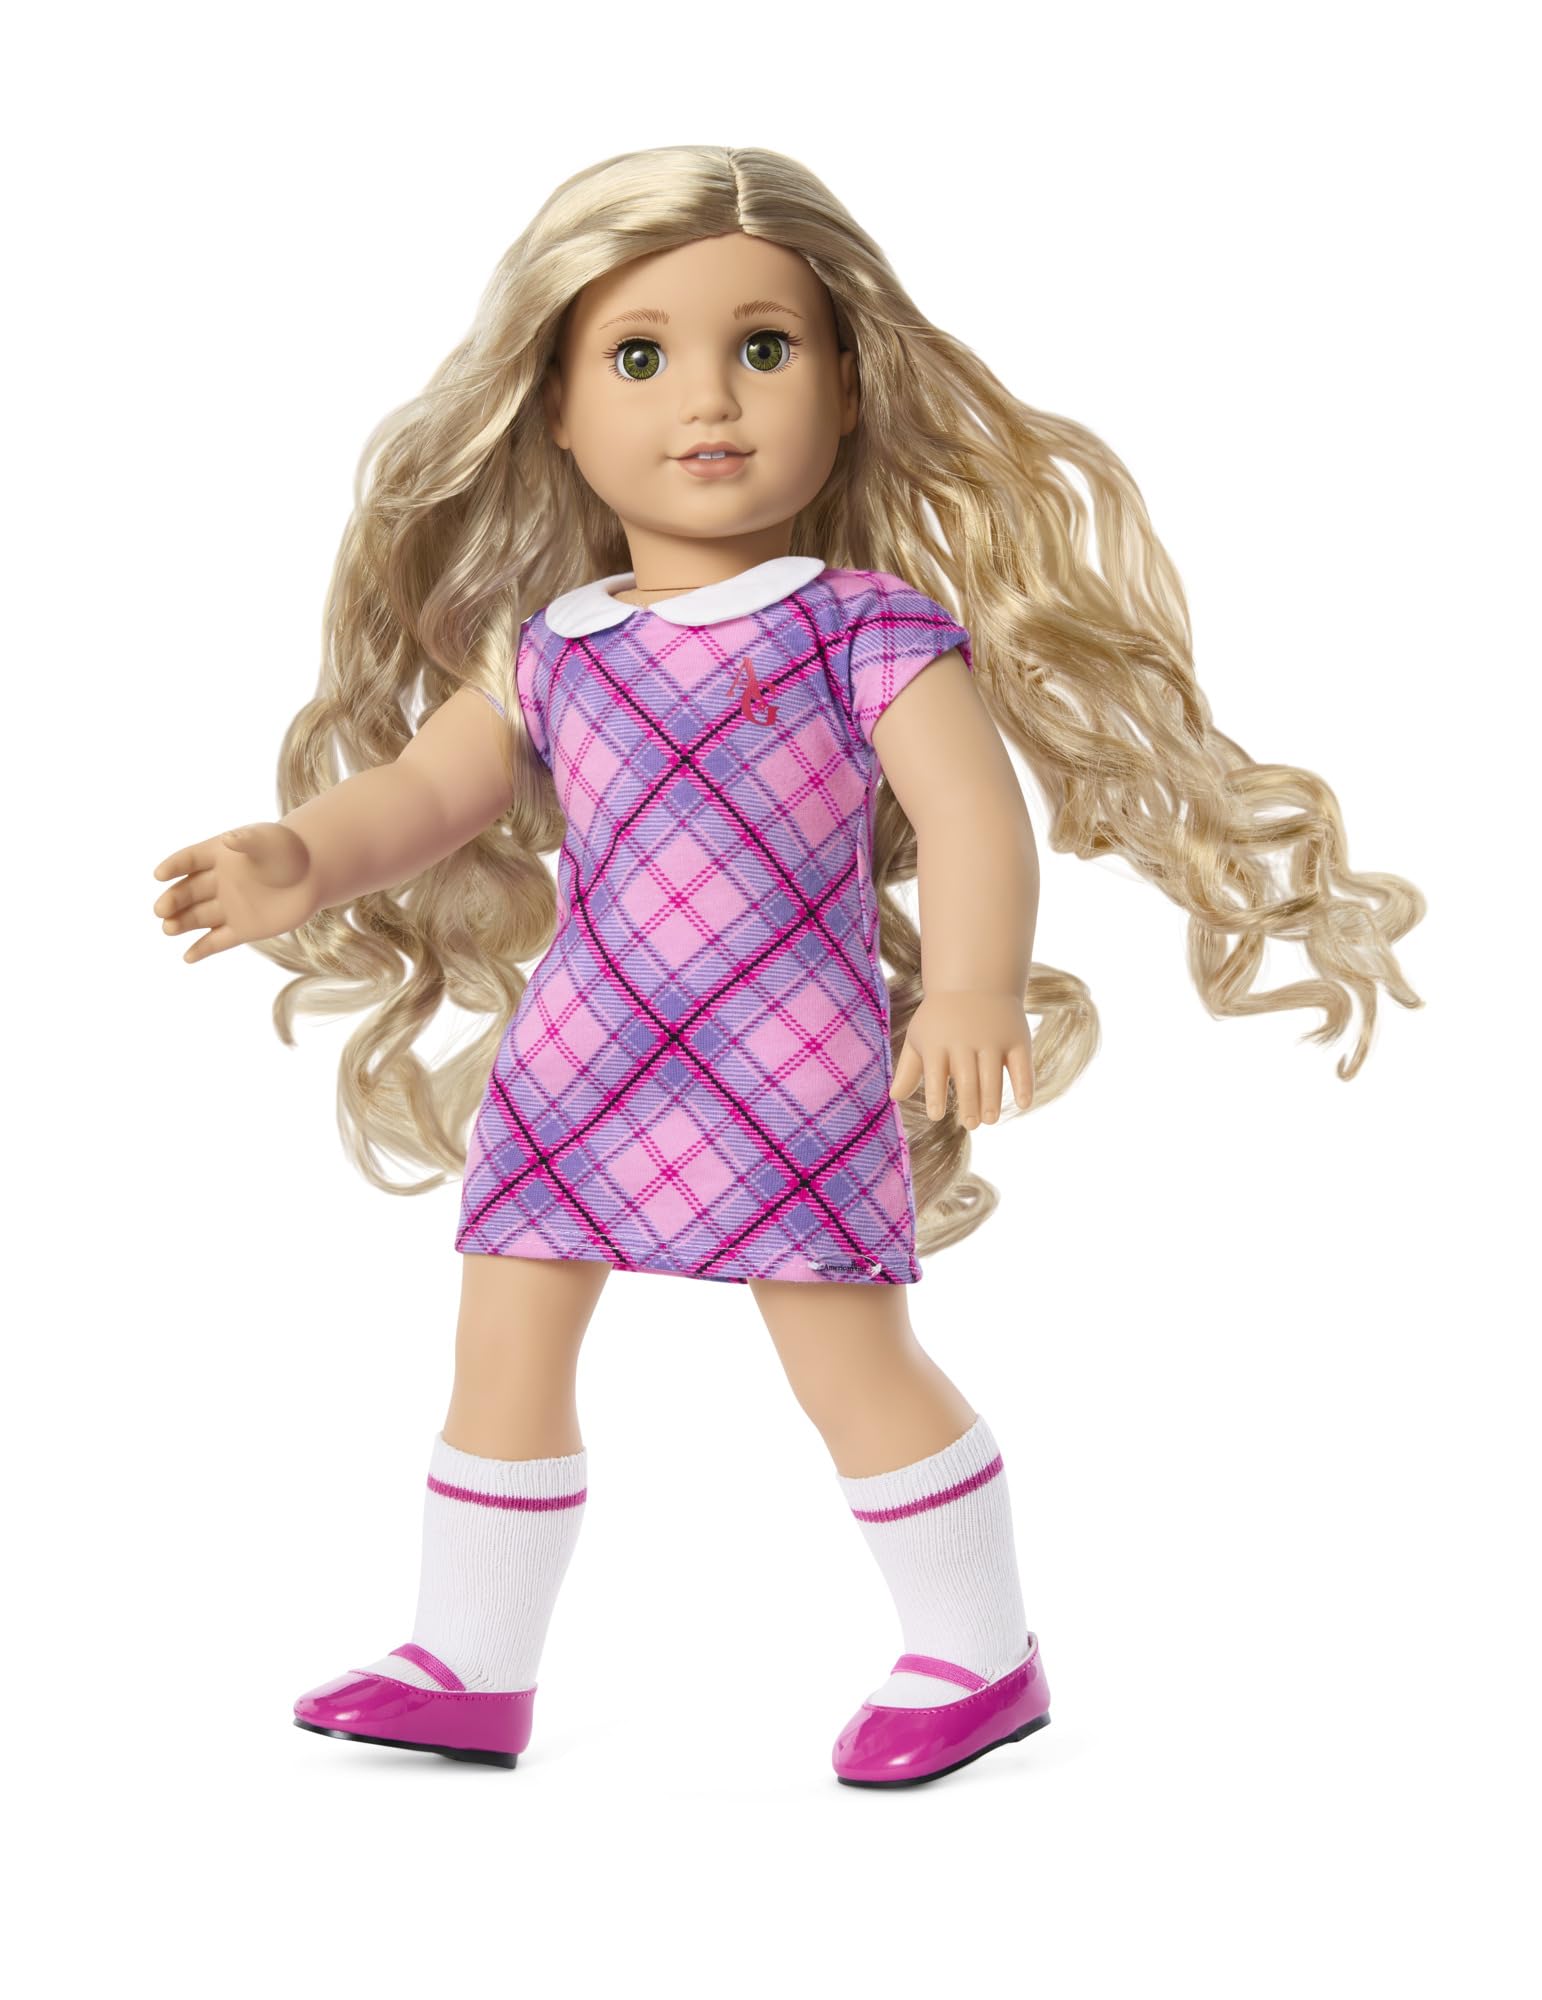 American Girl Truly Me 18-inch Doll #125 with Hazel Eyes, Curly Blonde Hair, Light Skin w/Warm Olive Undertones, for Ages 6+